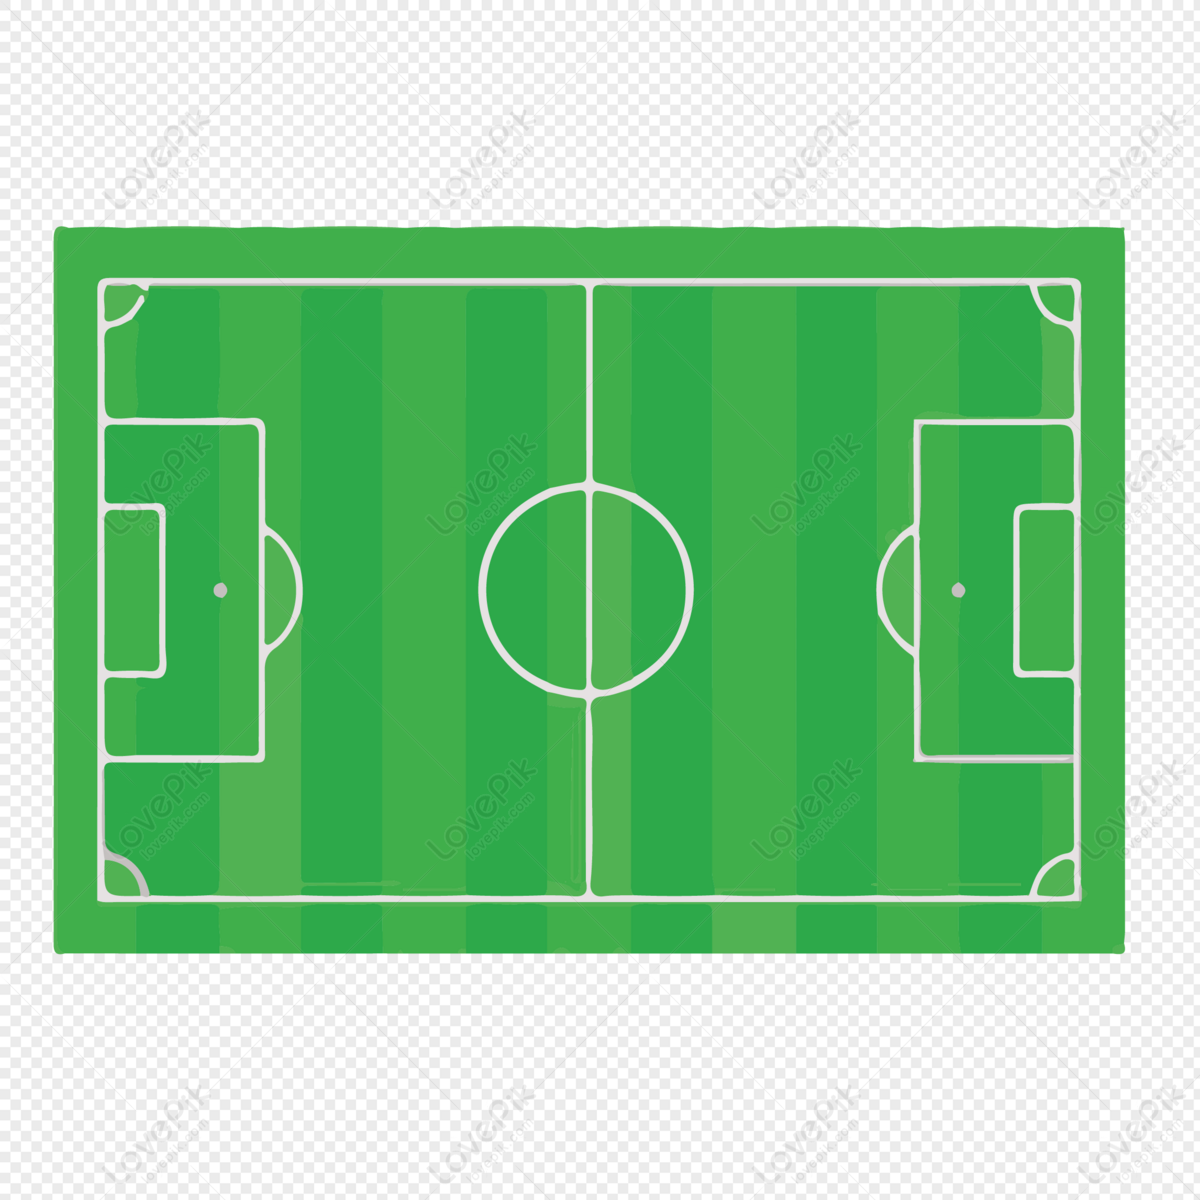 Football Field PNG Transparent Background And Clipart Image For Free  Download - Lovepik | 400518960